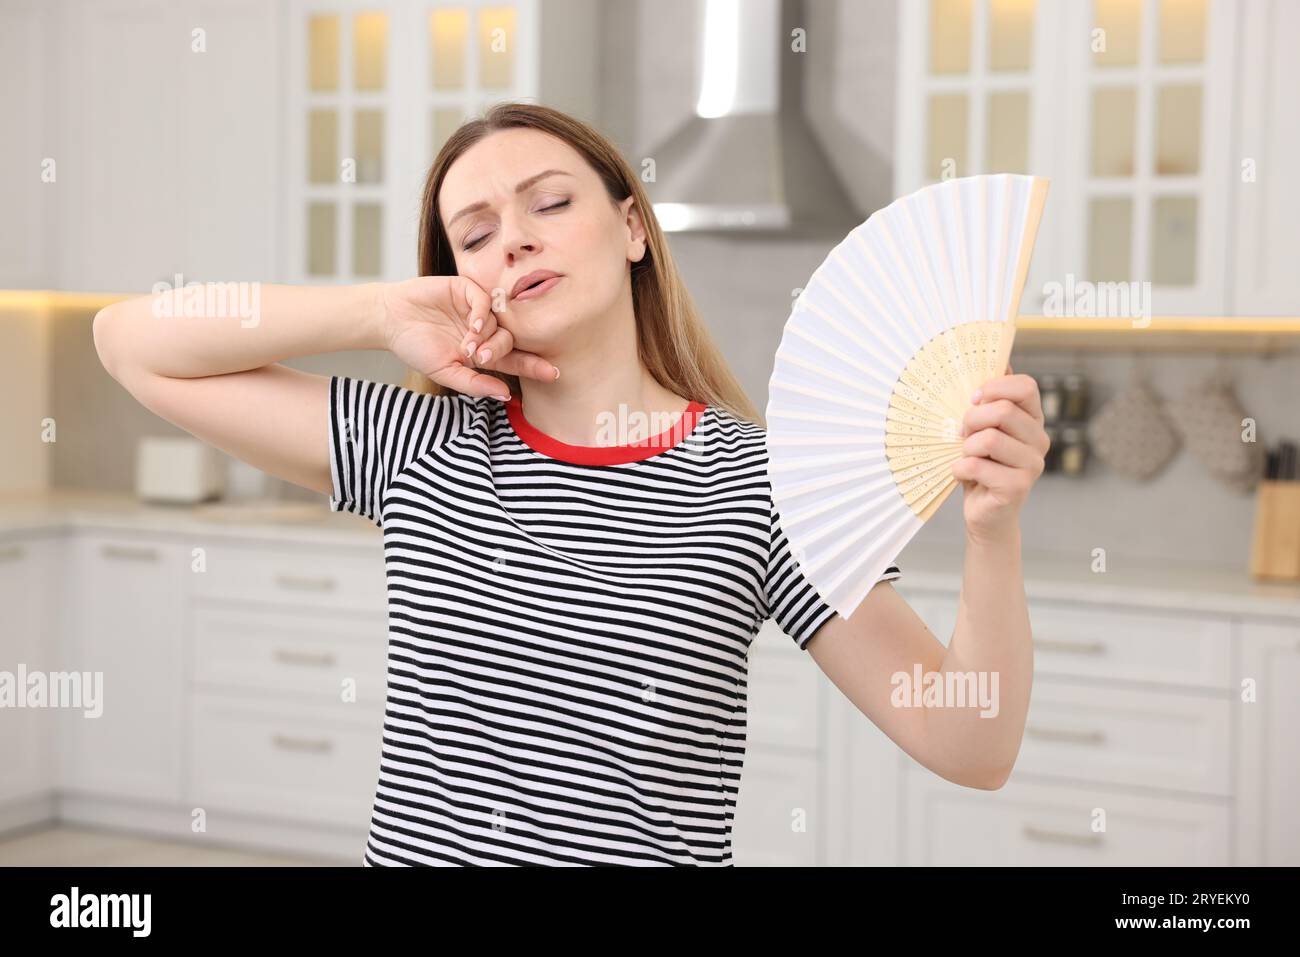 Woman with hand fan suffering from heat in kitchen Stock Photo